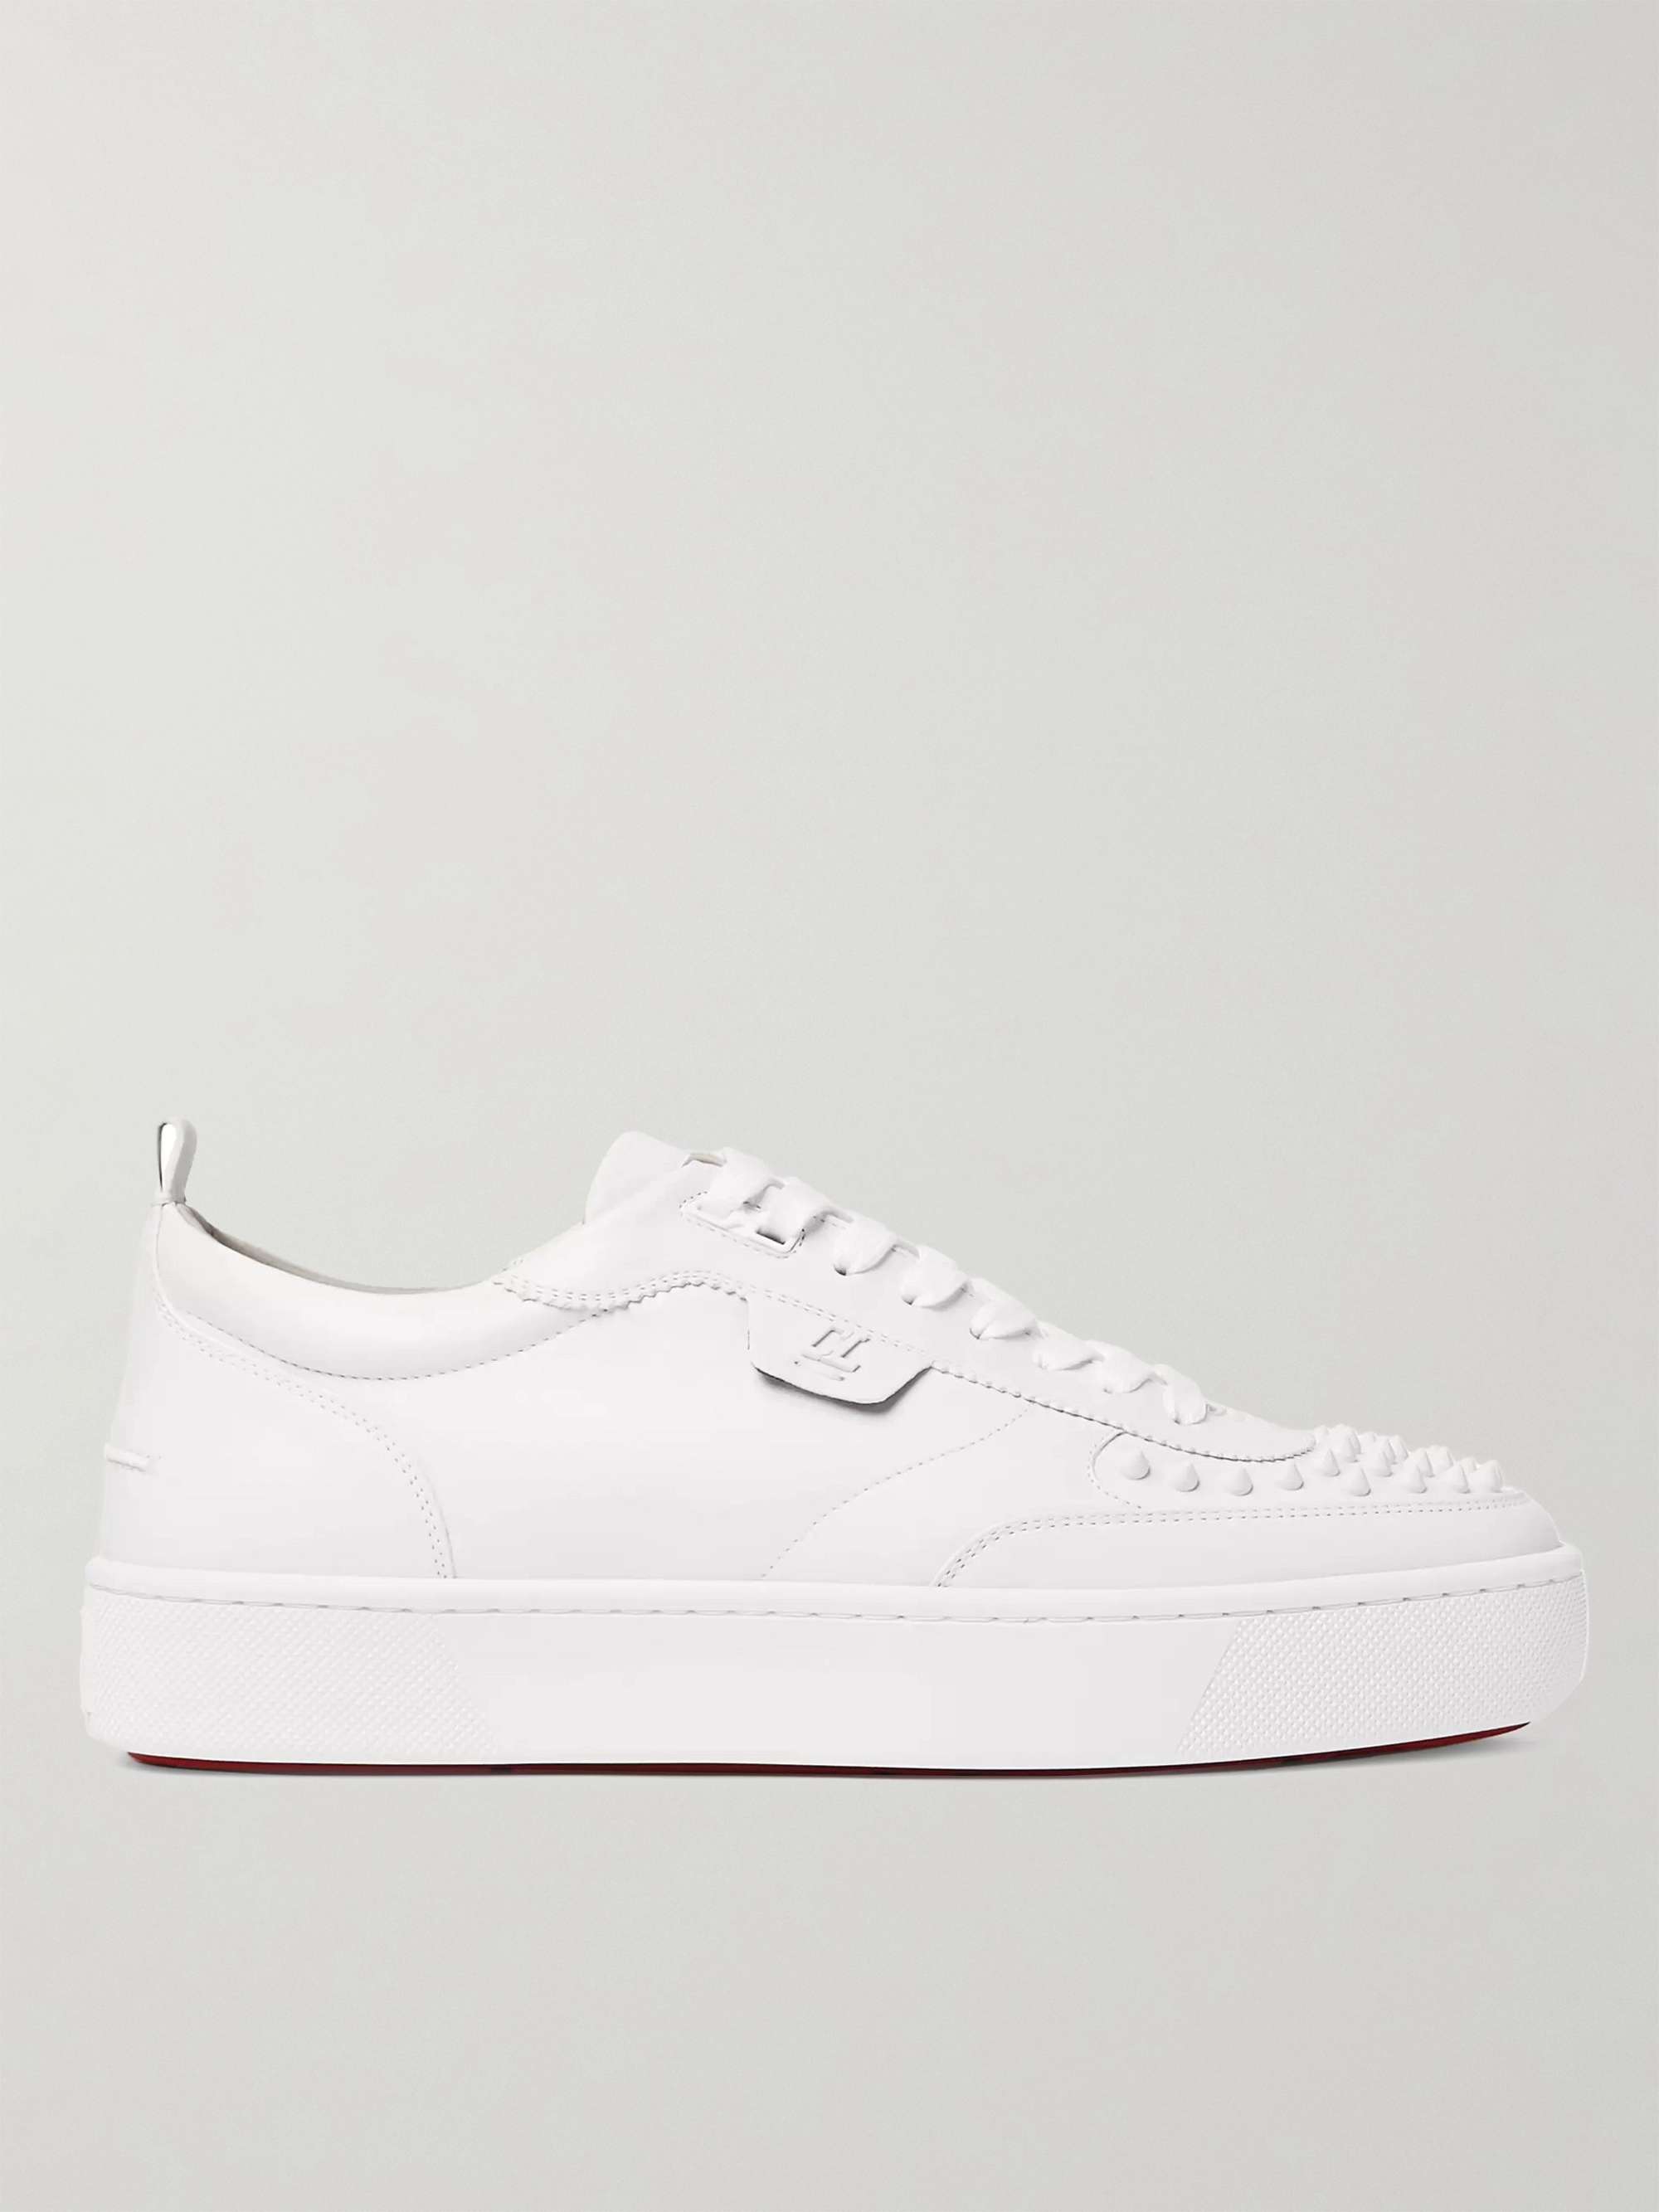 Diplomacy Remain Ladder White Happyrui Spiked Leather Sneakers | CHRISTIAN LOUBOUTIN | MR PORTER